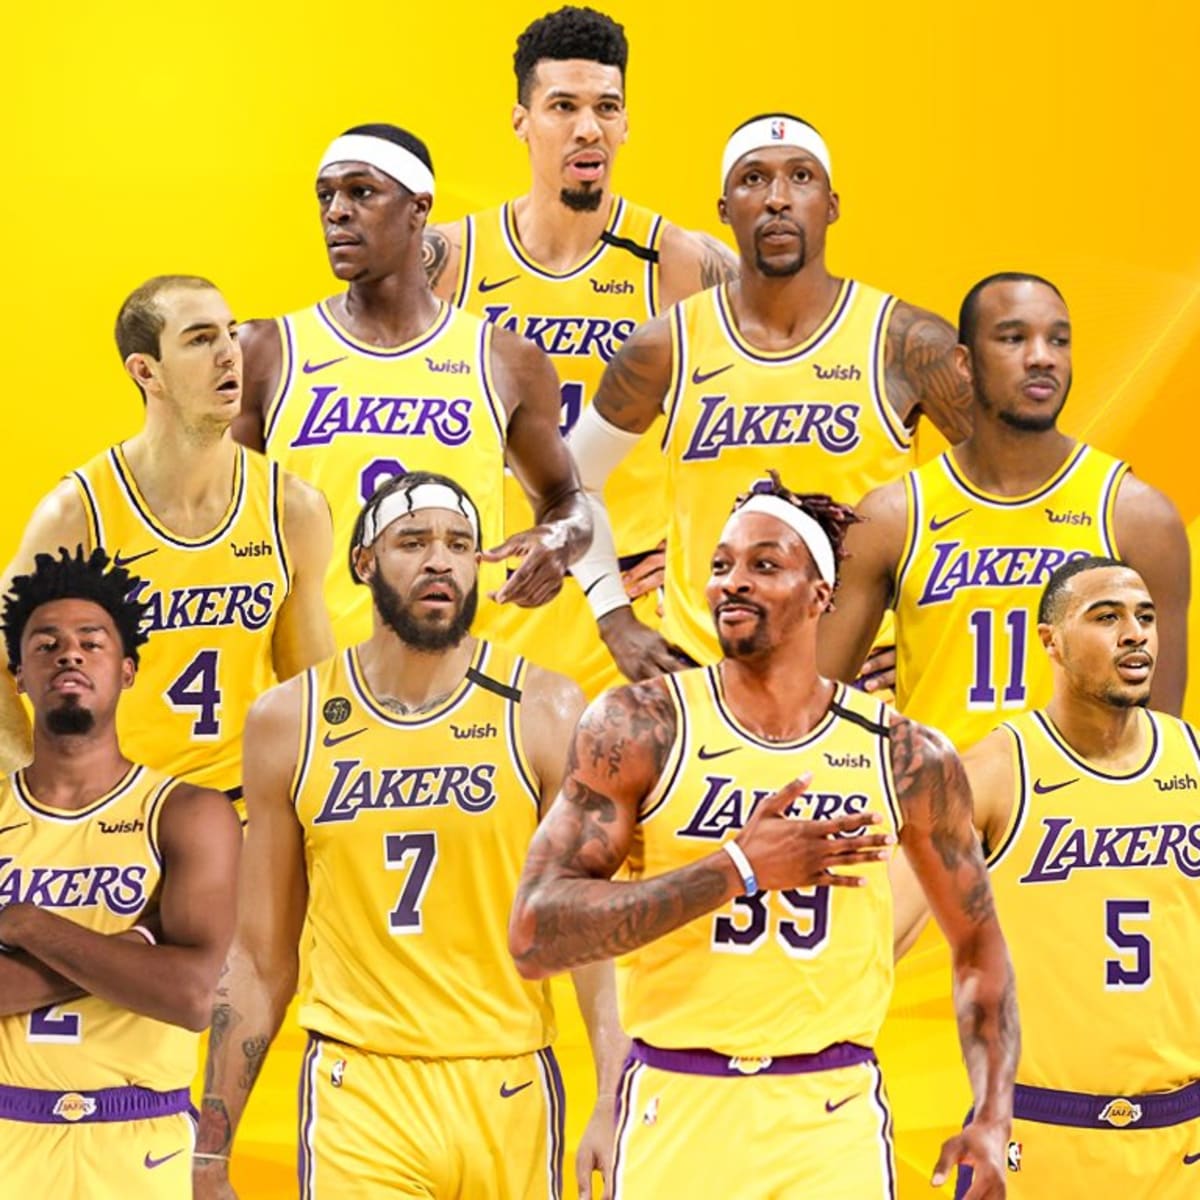 Players Lakers Roster 2021 / Los Angeles Lakers 2020 2021 Roster